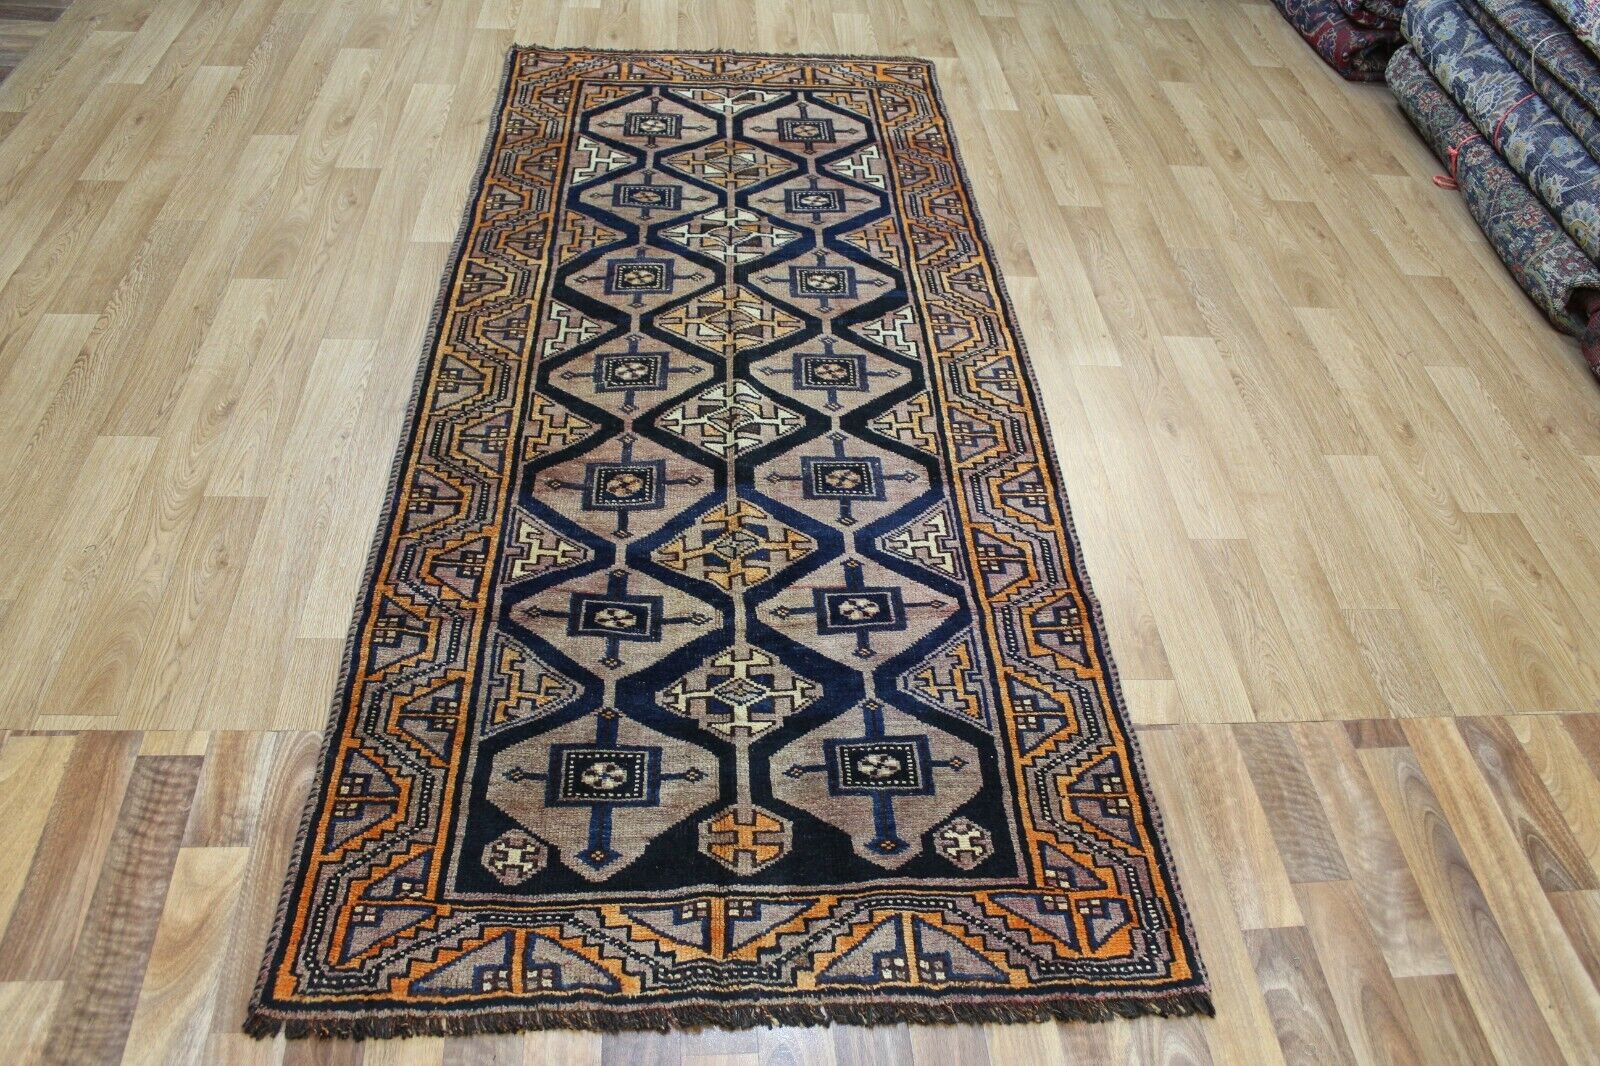 ANTIQUE NORTH WEST PERSIAN RUNNER RUG, VERY HARD WEARING 295 x 110 cm